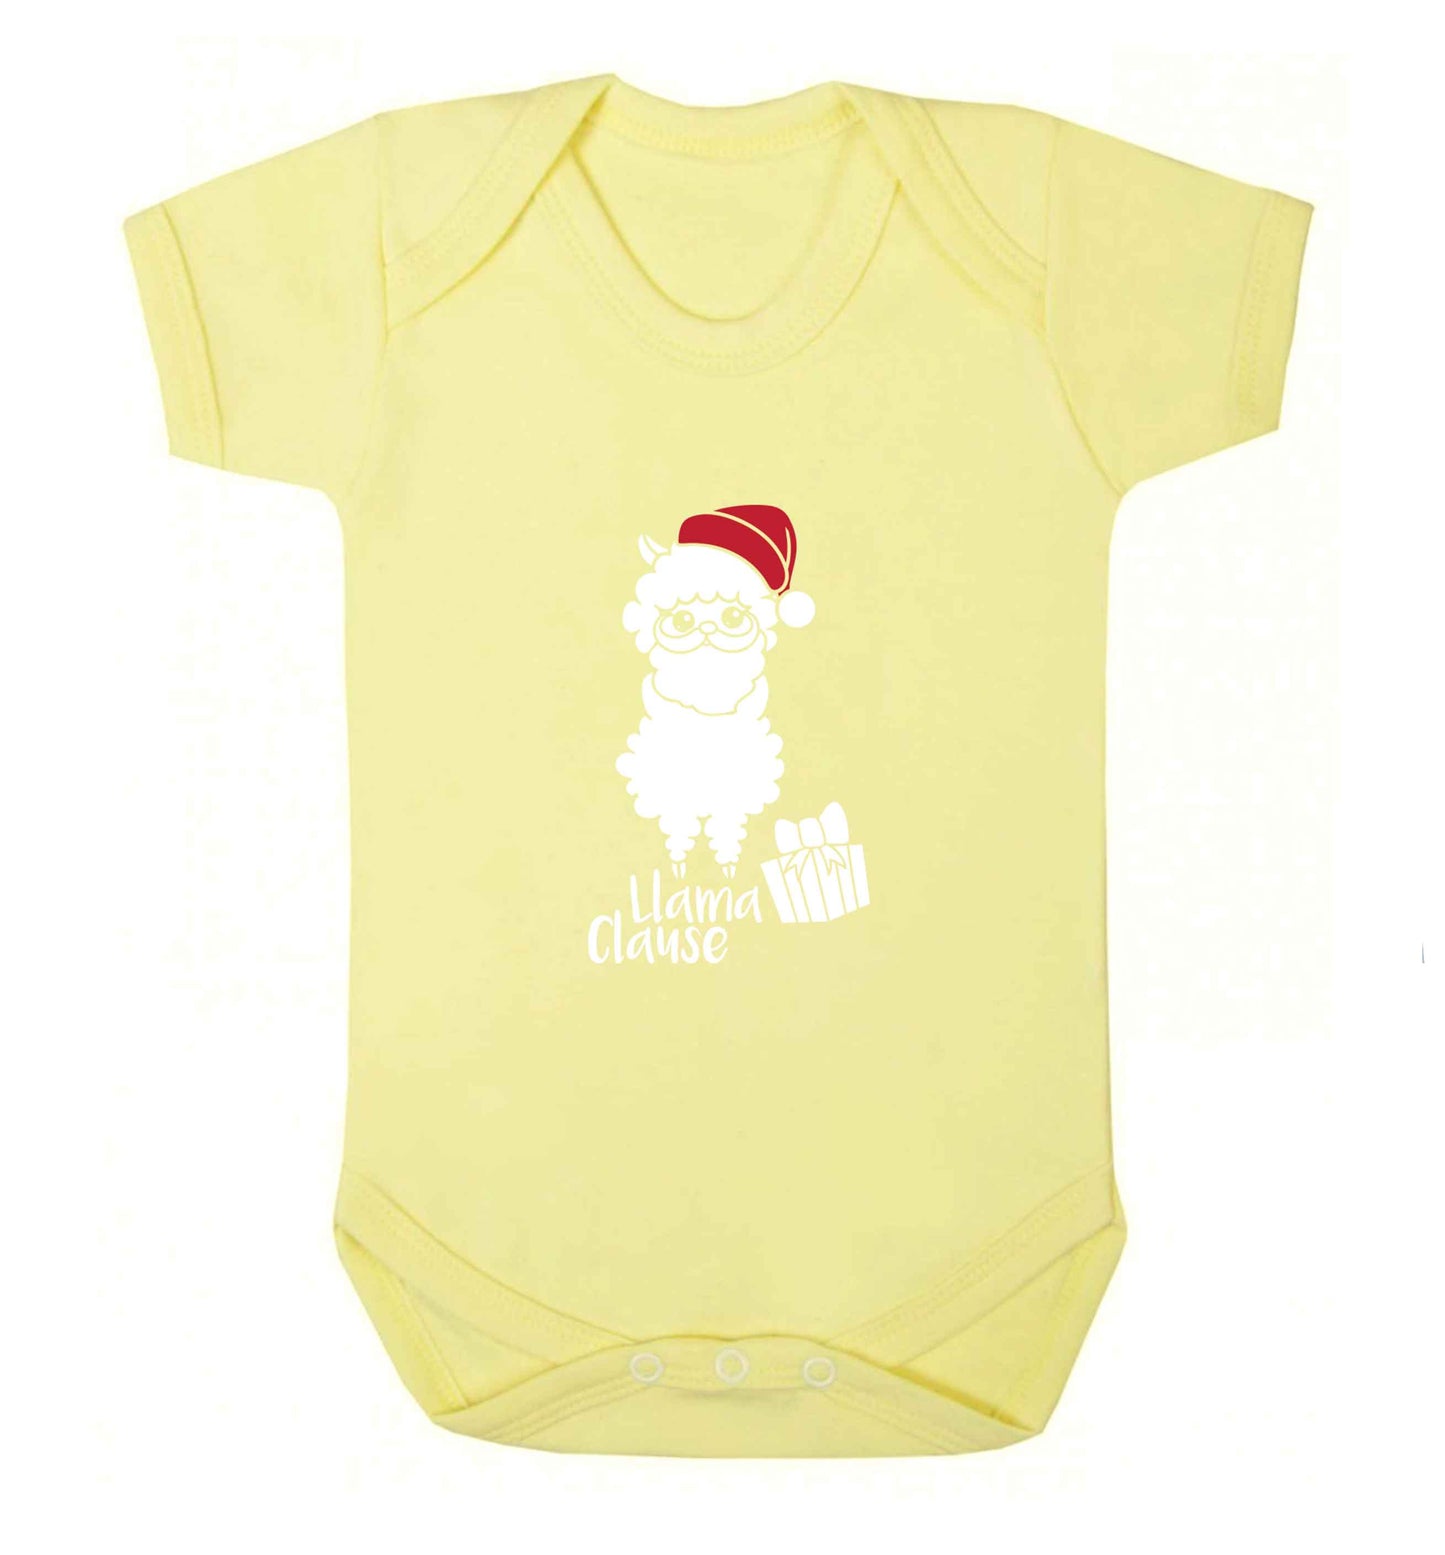 Llama Clause baby vest pale yellow 18-24 months